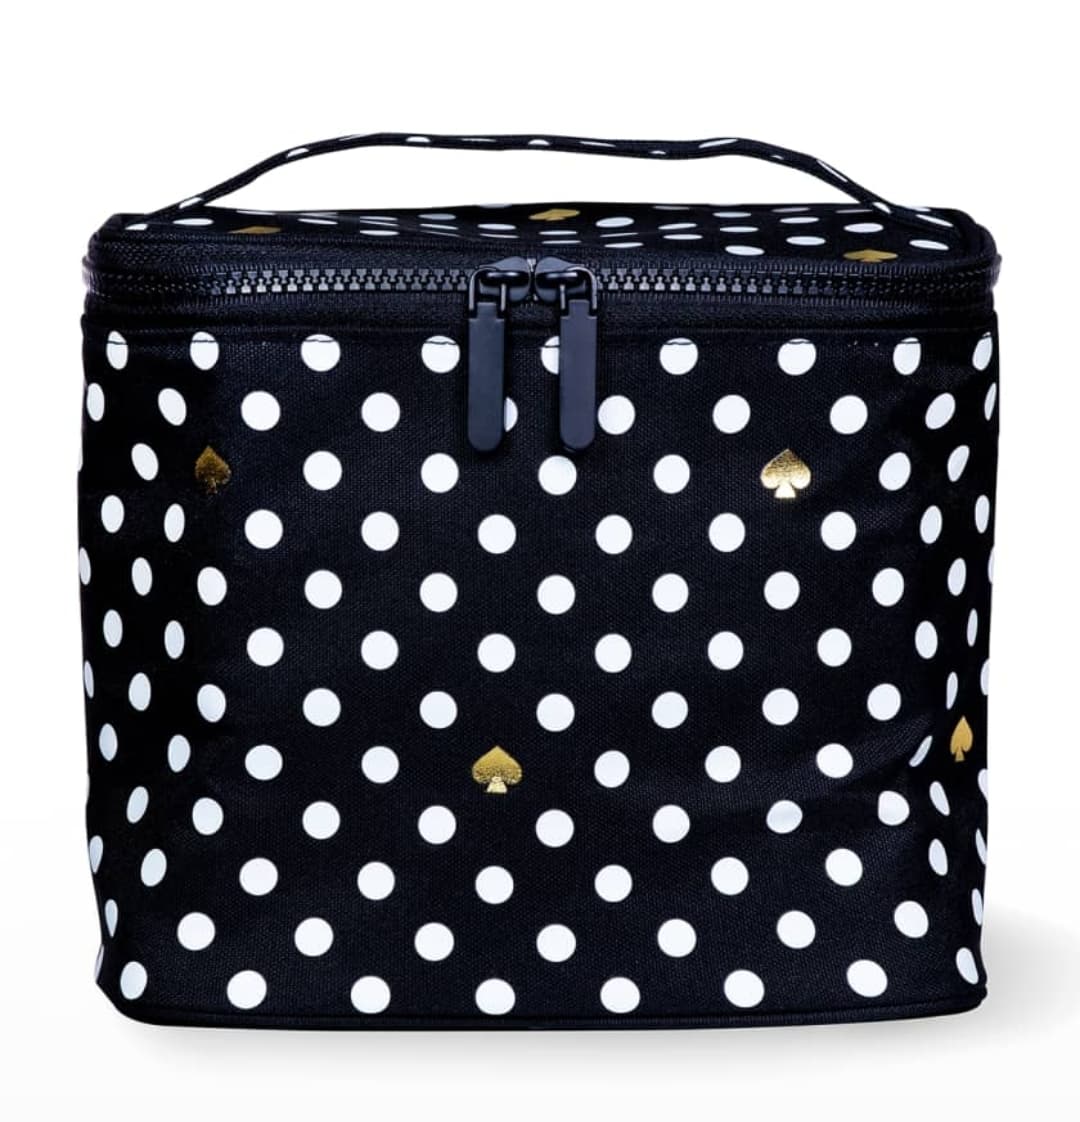 KATE SPADE NEW YORK LUNCH TOTES